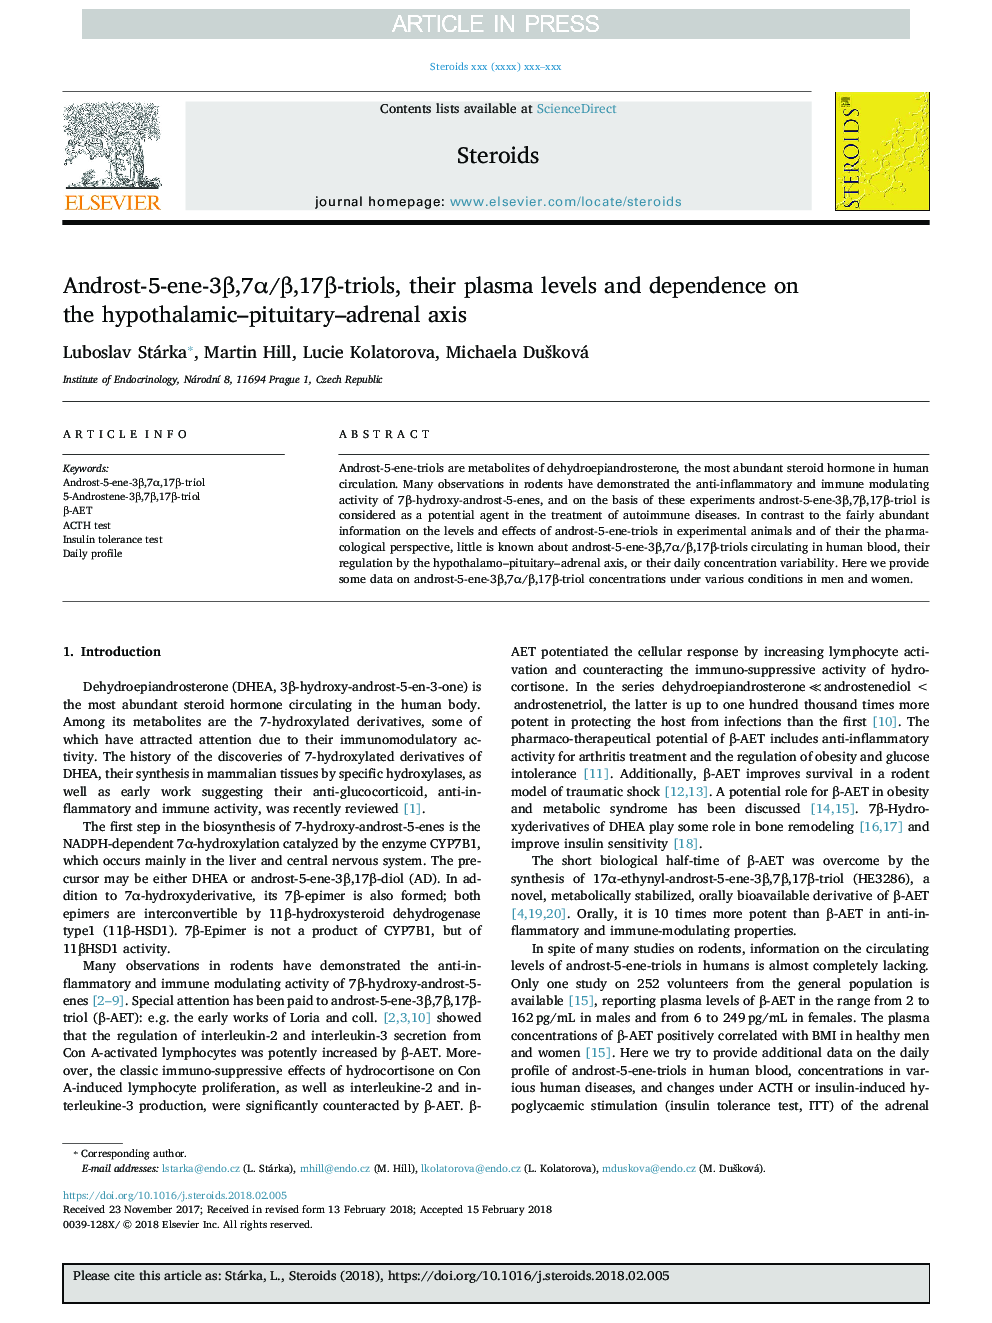 Androst-5-ene-3Î²,7Î±/Î²,17Î²-triols, their plasma levels and dependence on the hypothalamic-pituitary-adrenal axis